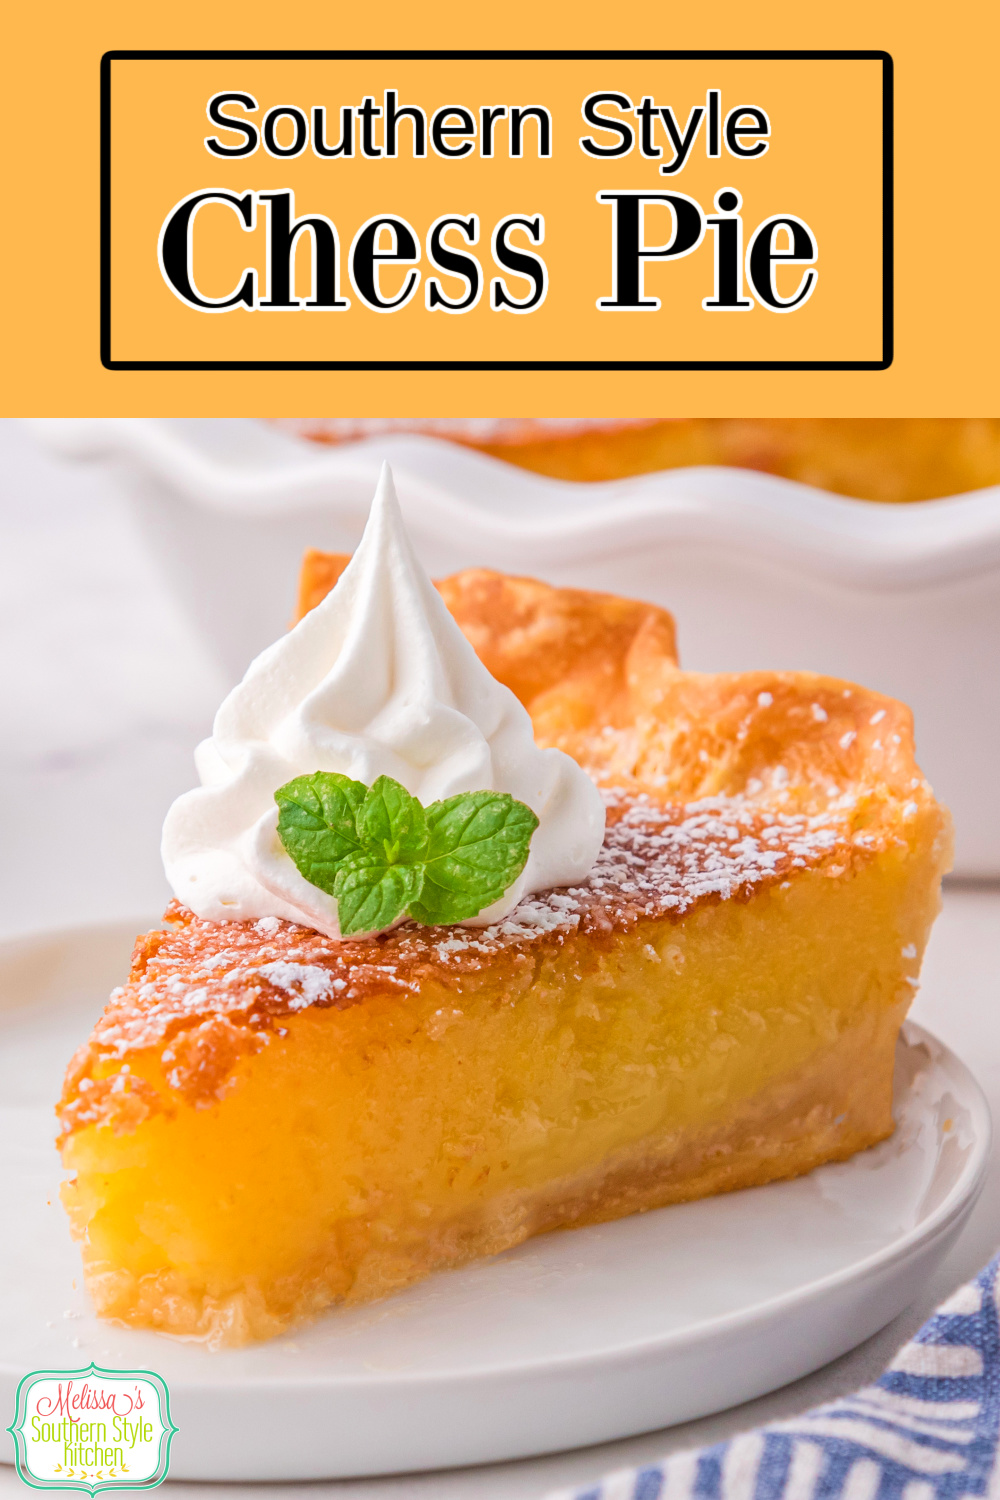 This Southern Chess Pie recipe is made with pantry staples turning ordinary ingredients into an extraordinary dessert. #chesspie #chesspierecipe #southernchesspie #easypierecipes #pie #easypierecipes